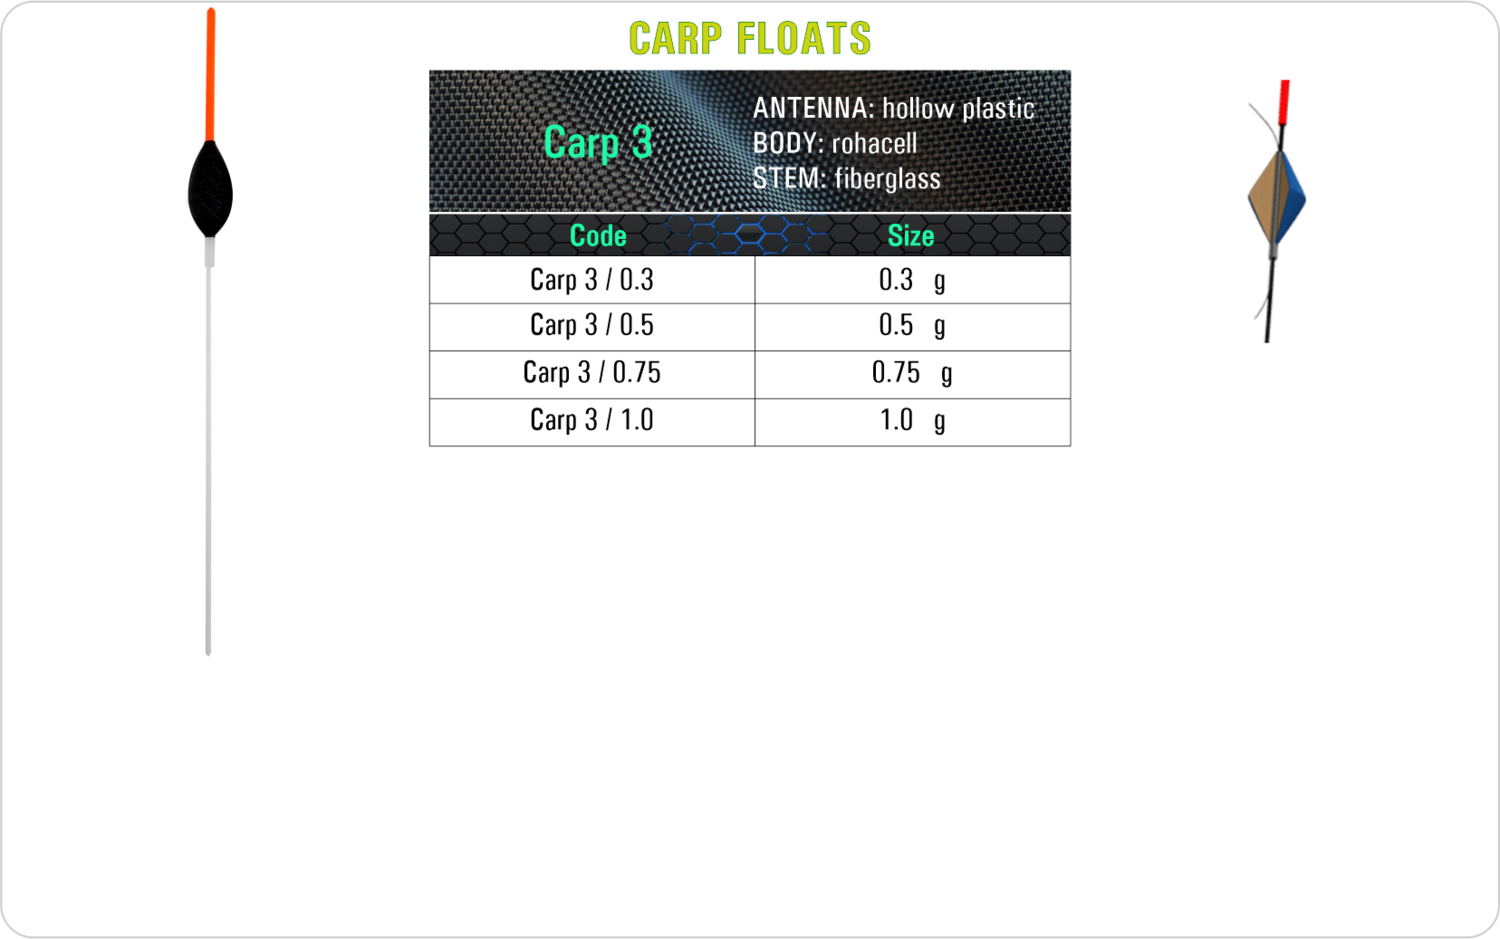 SF Carp 3 Carp float model and table containing an additional information about this float with different codes, sizes, types of the body, the stem and the antenna of the float.